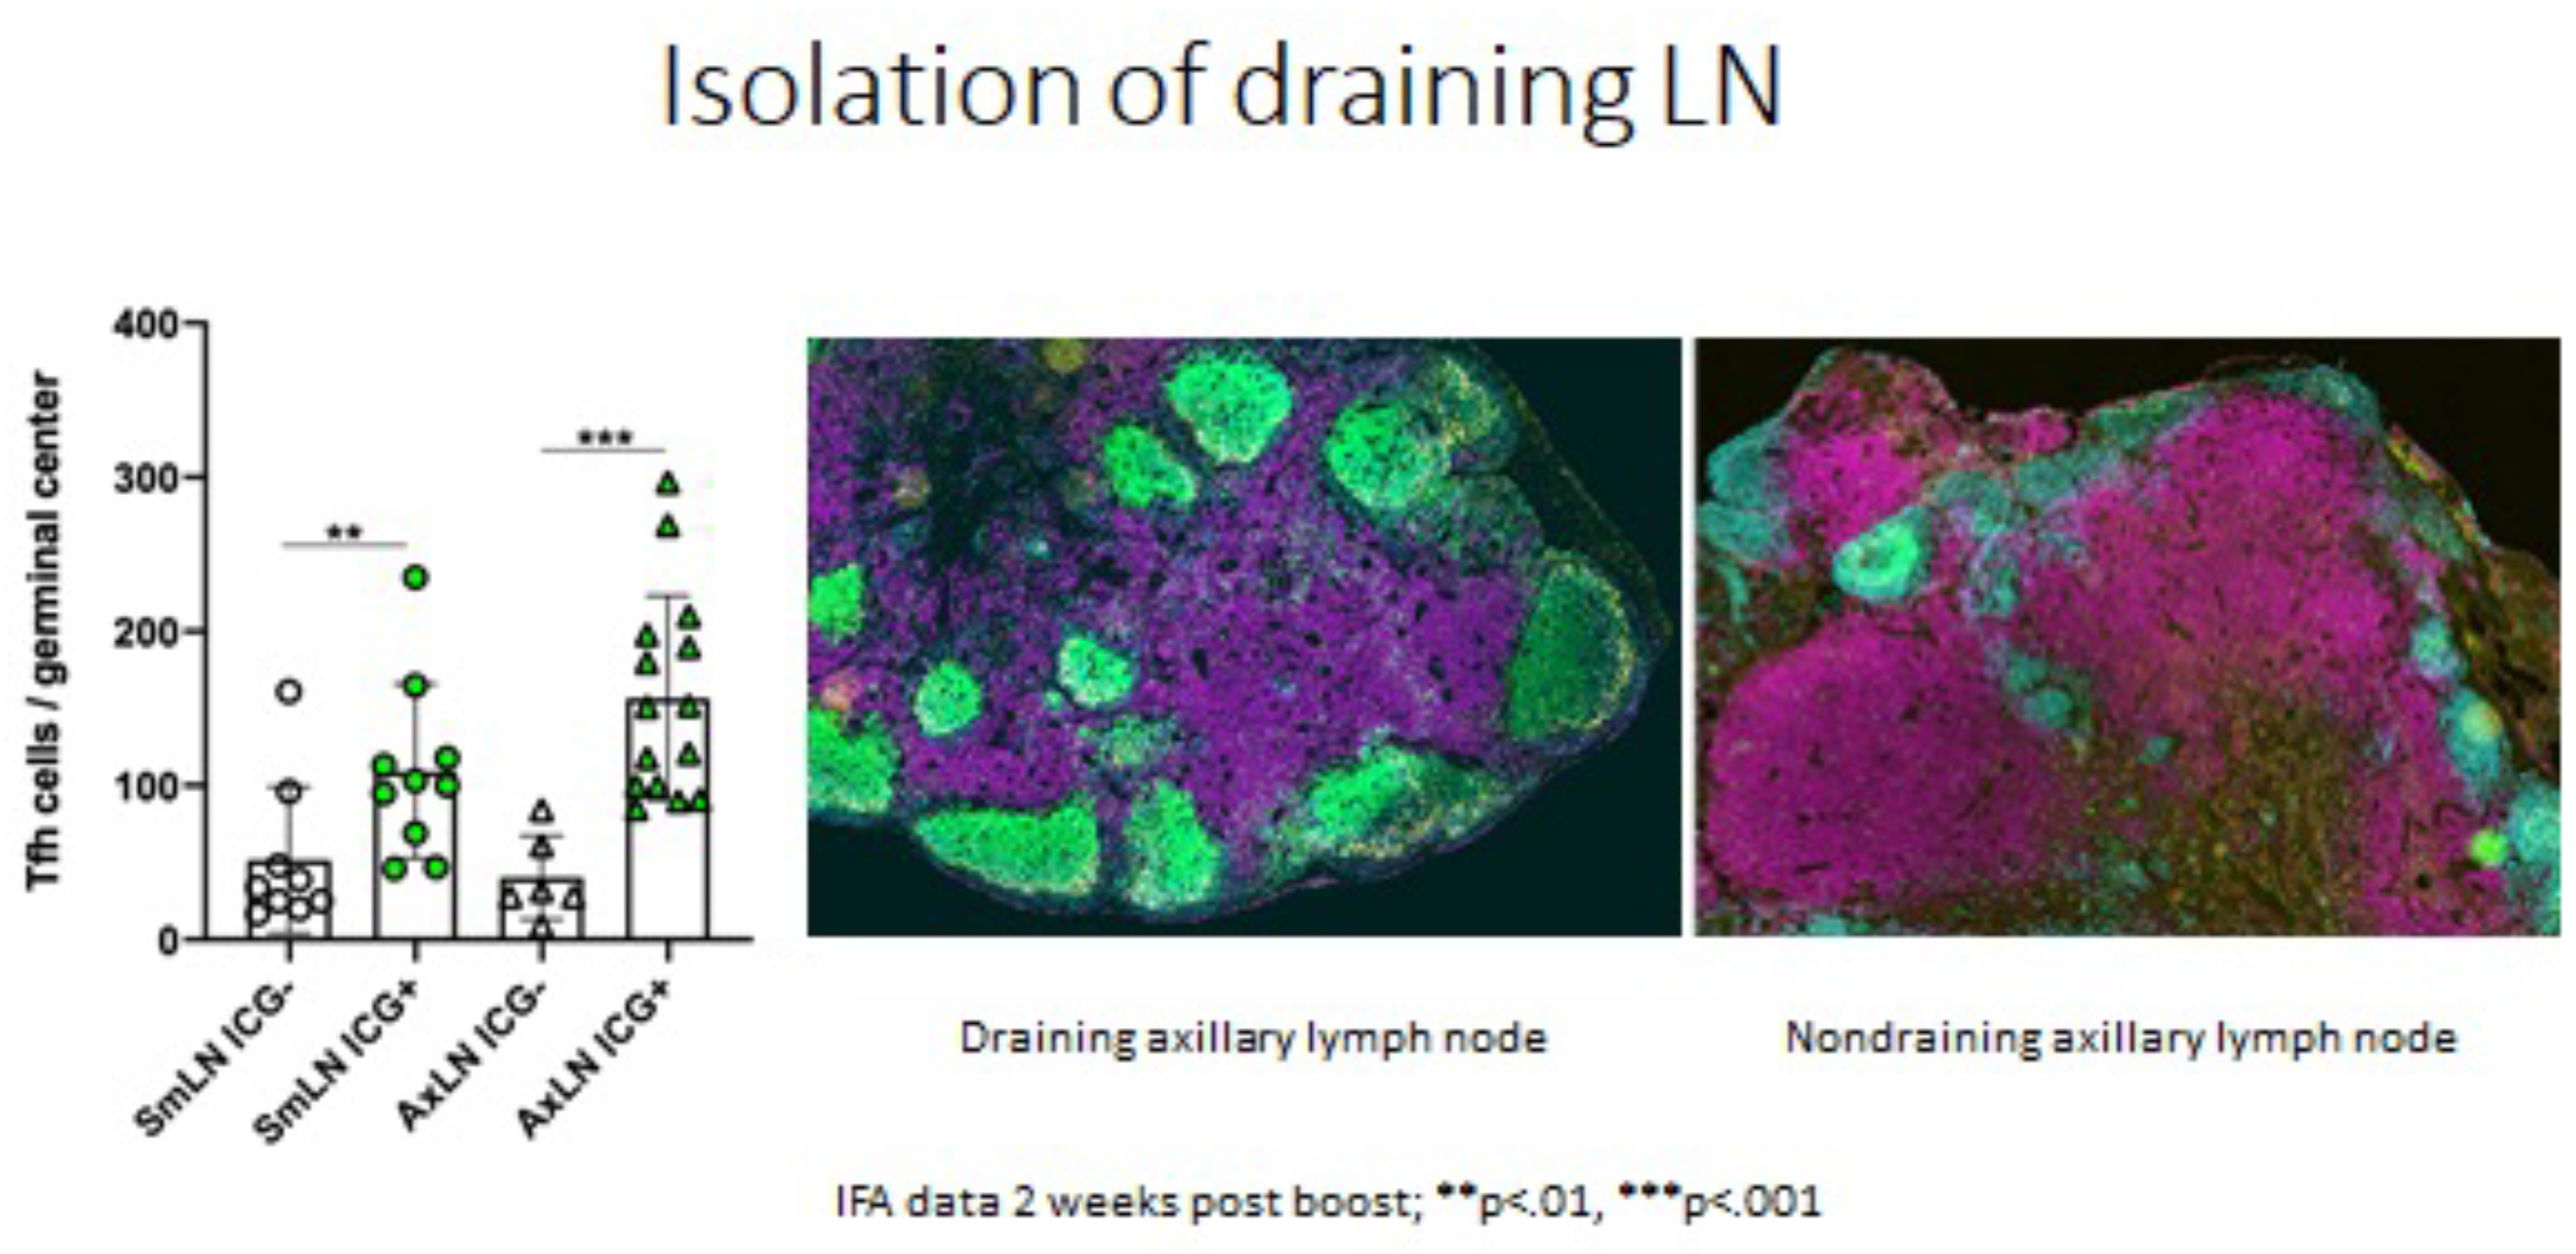 The use of ICG to identify draining nodes and the activation state of draining nodes that are exposed to an vaccine compared to nondraining nodes that are at the same site but not responding to the vaccine